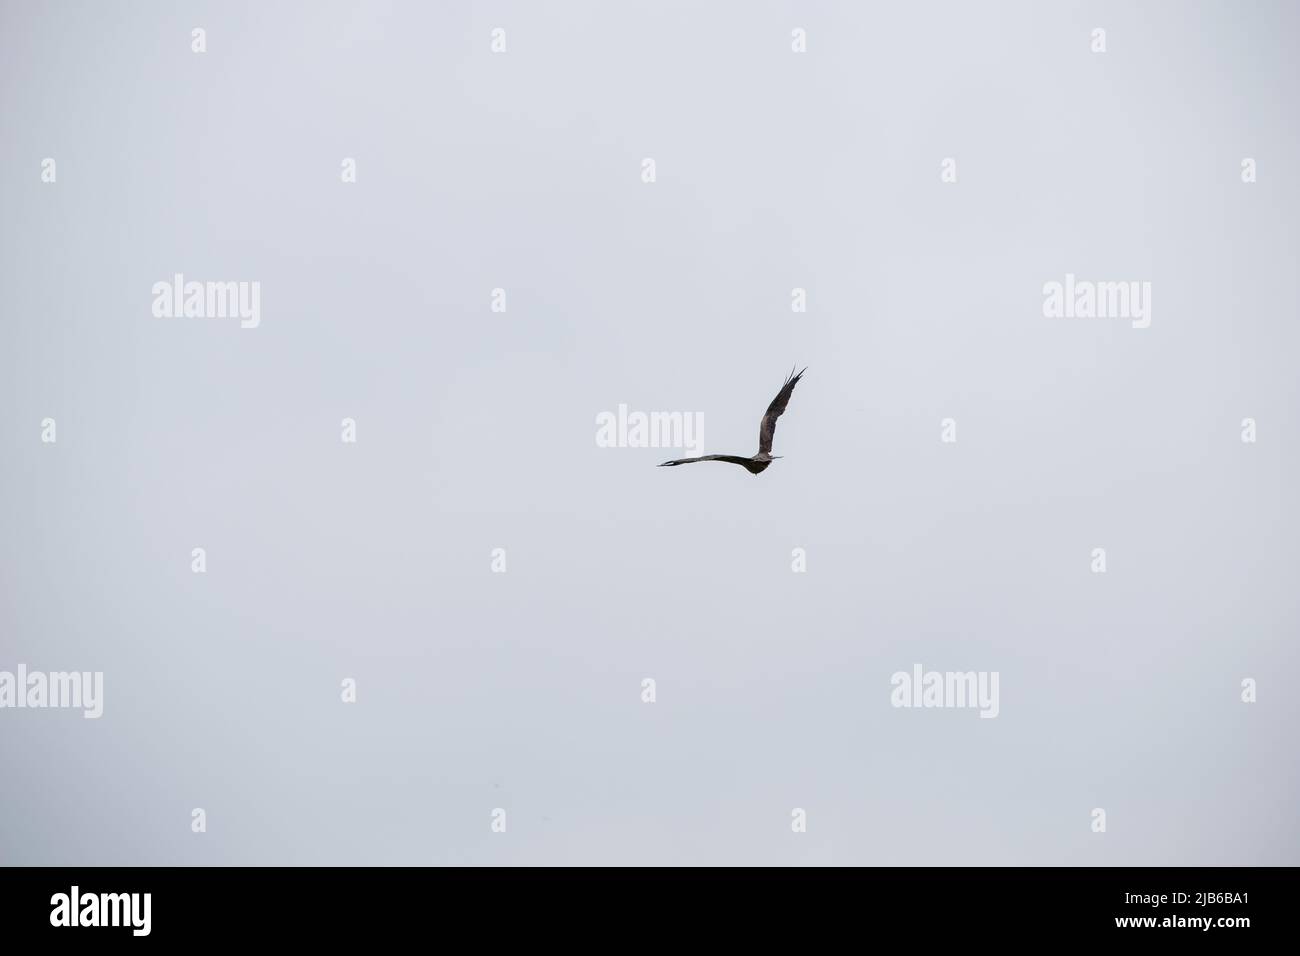 The view of birds In flight Stock Photo